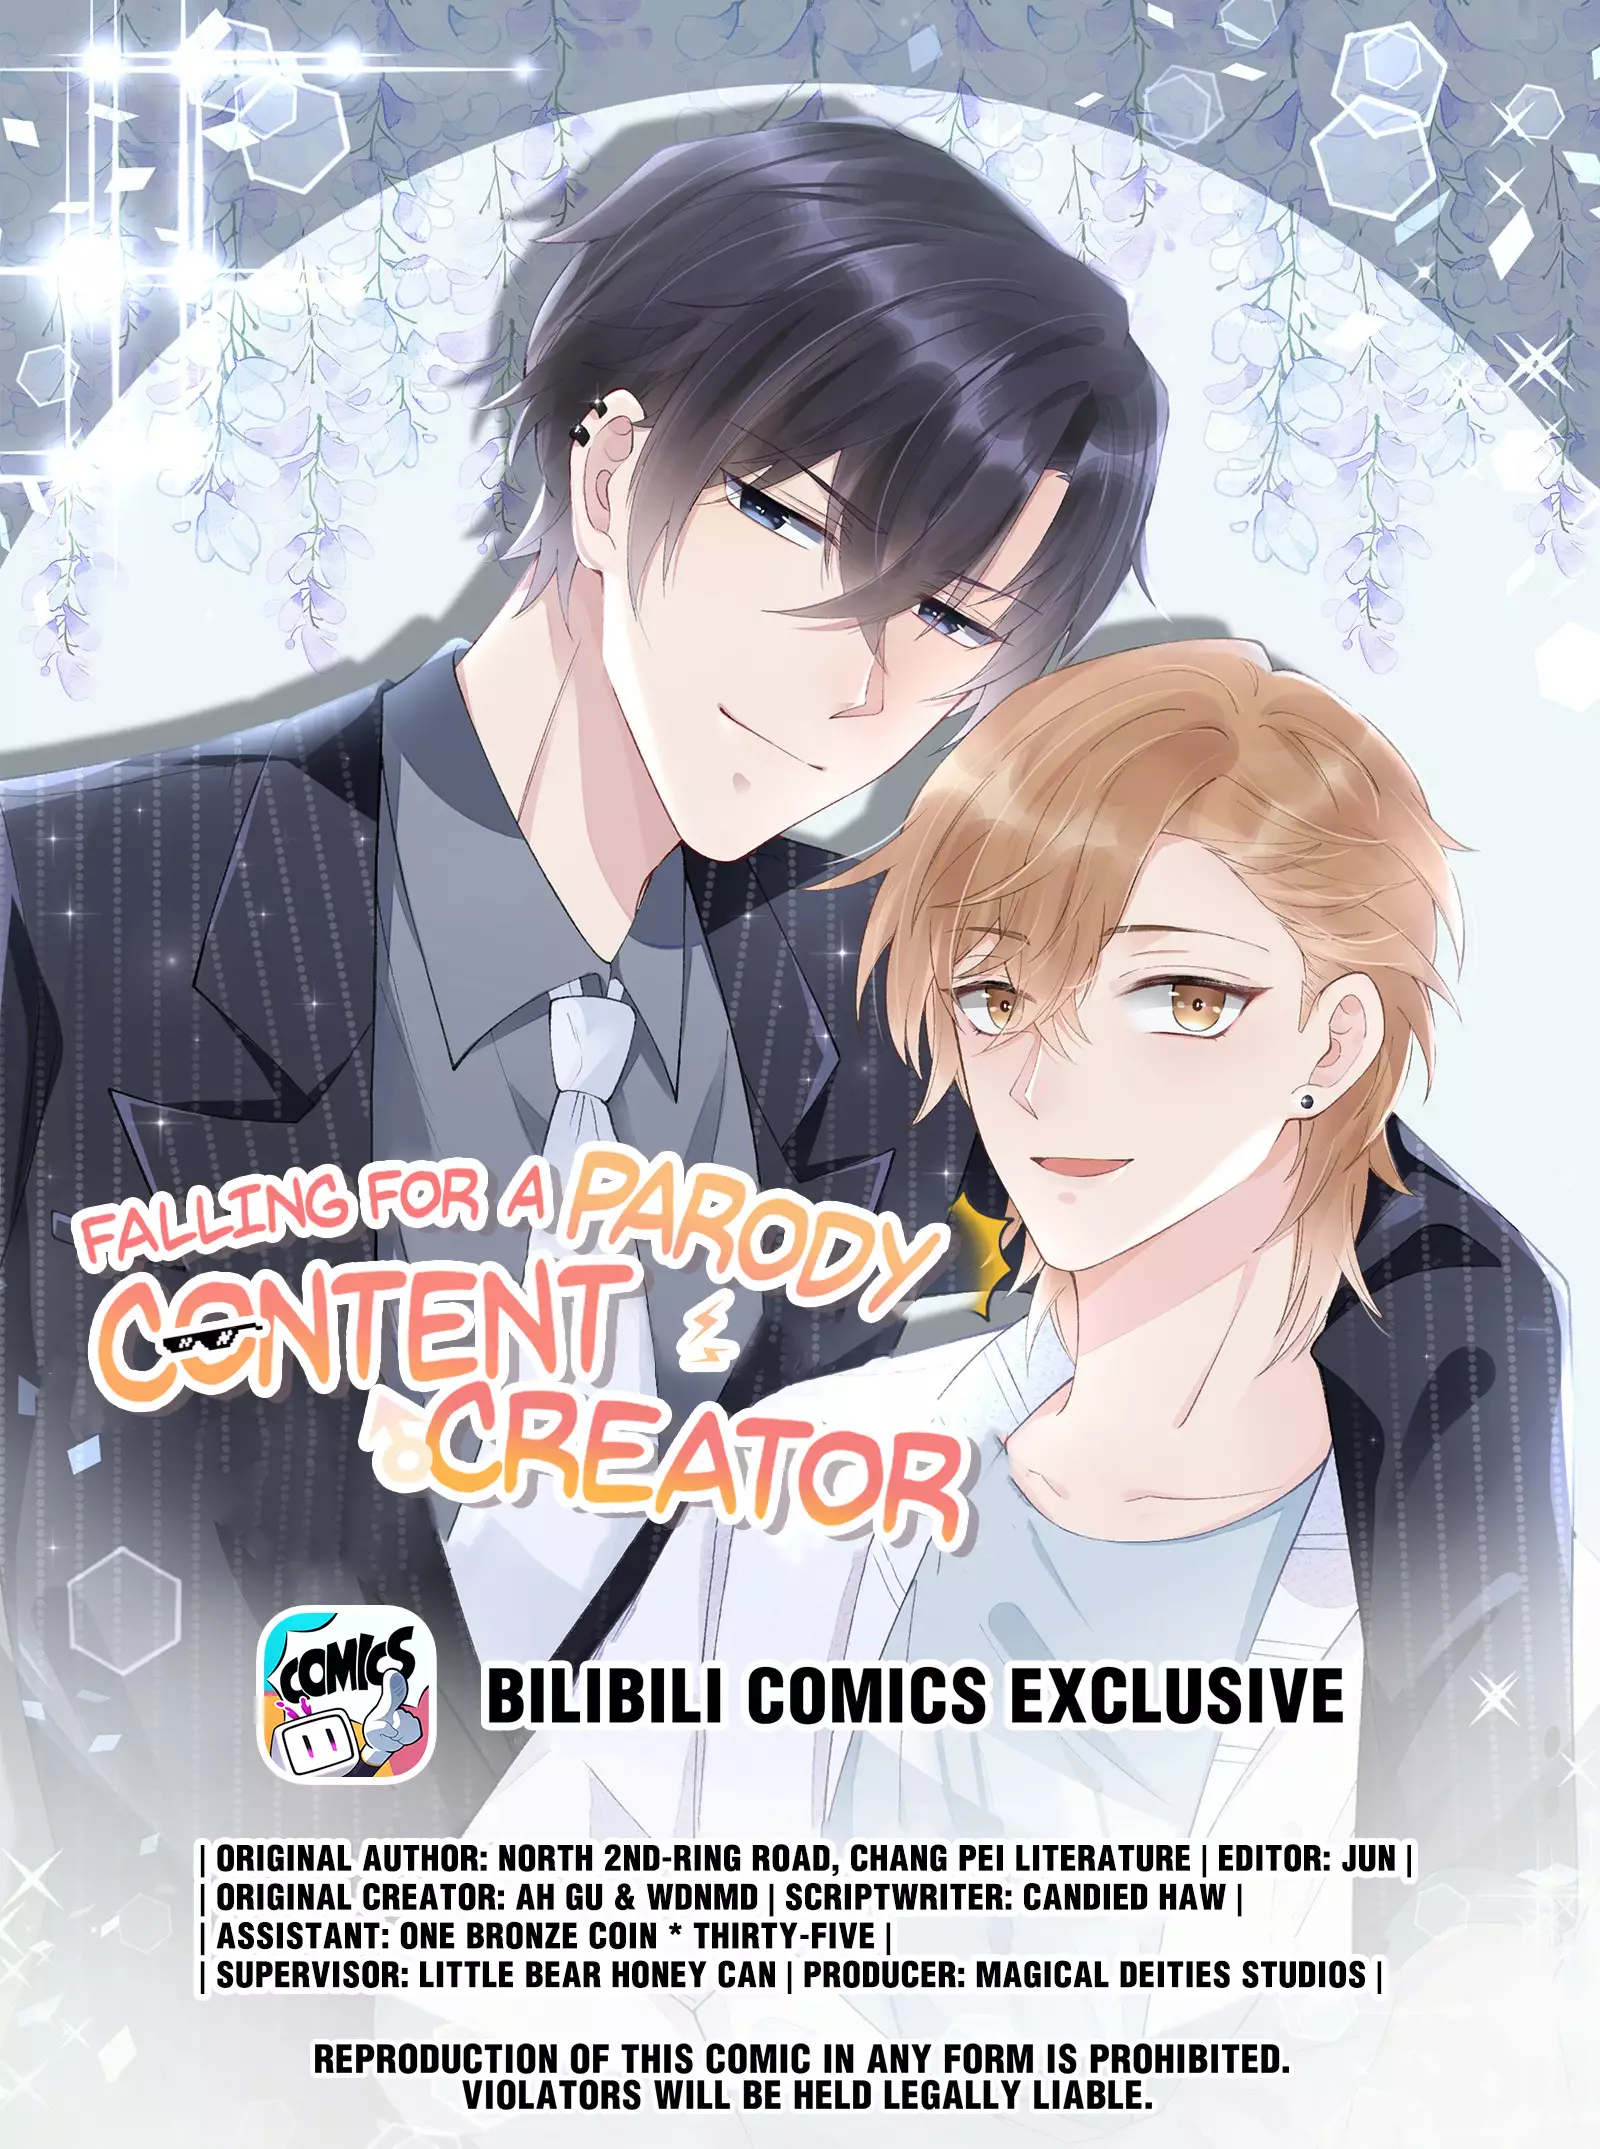 Falling For A Parody Content Creator - 8 page 1-fd007a11